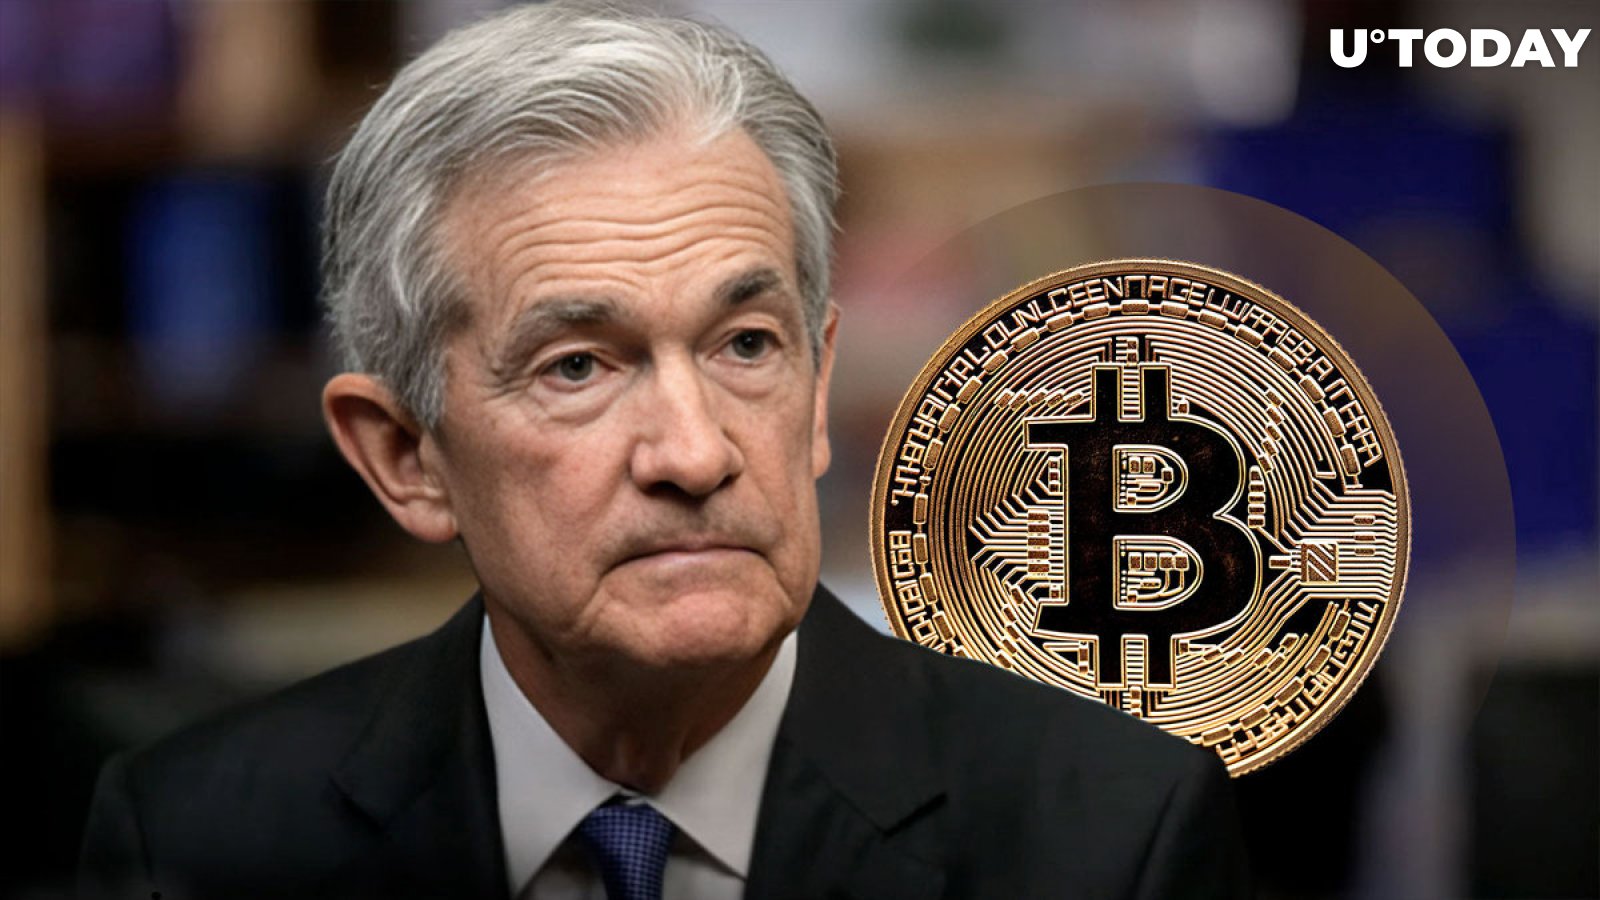 Bitcoin Buy Signal Emerges as Jerome Powell Offers Strong Economic Outlook